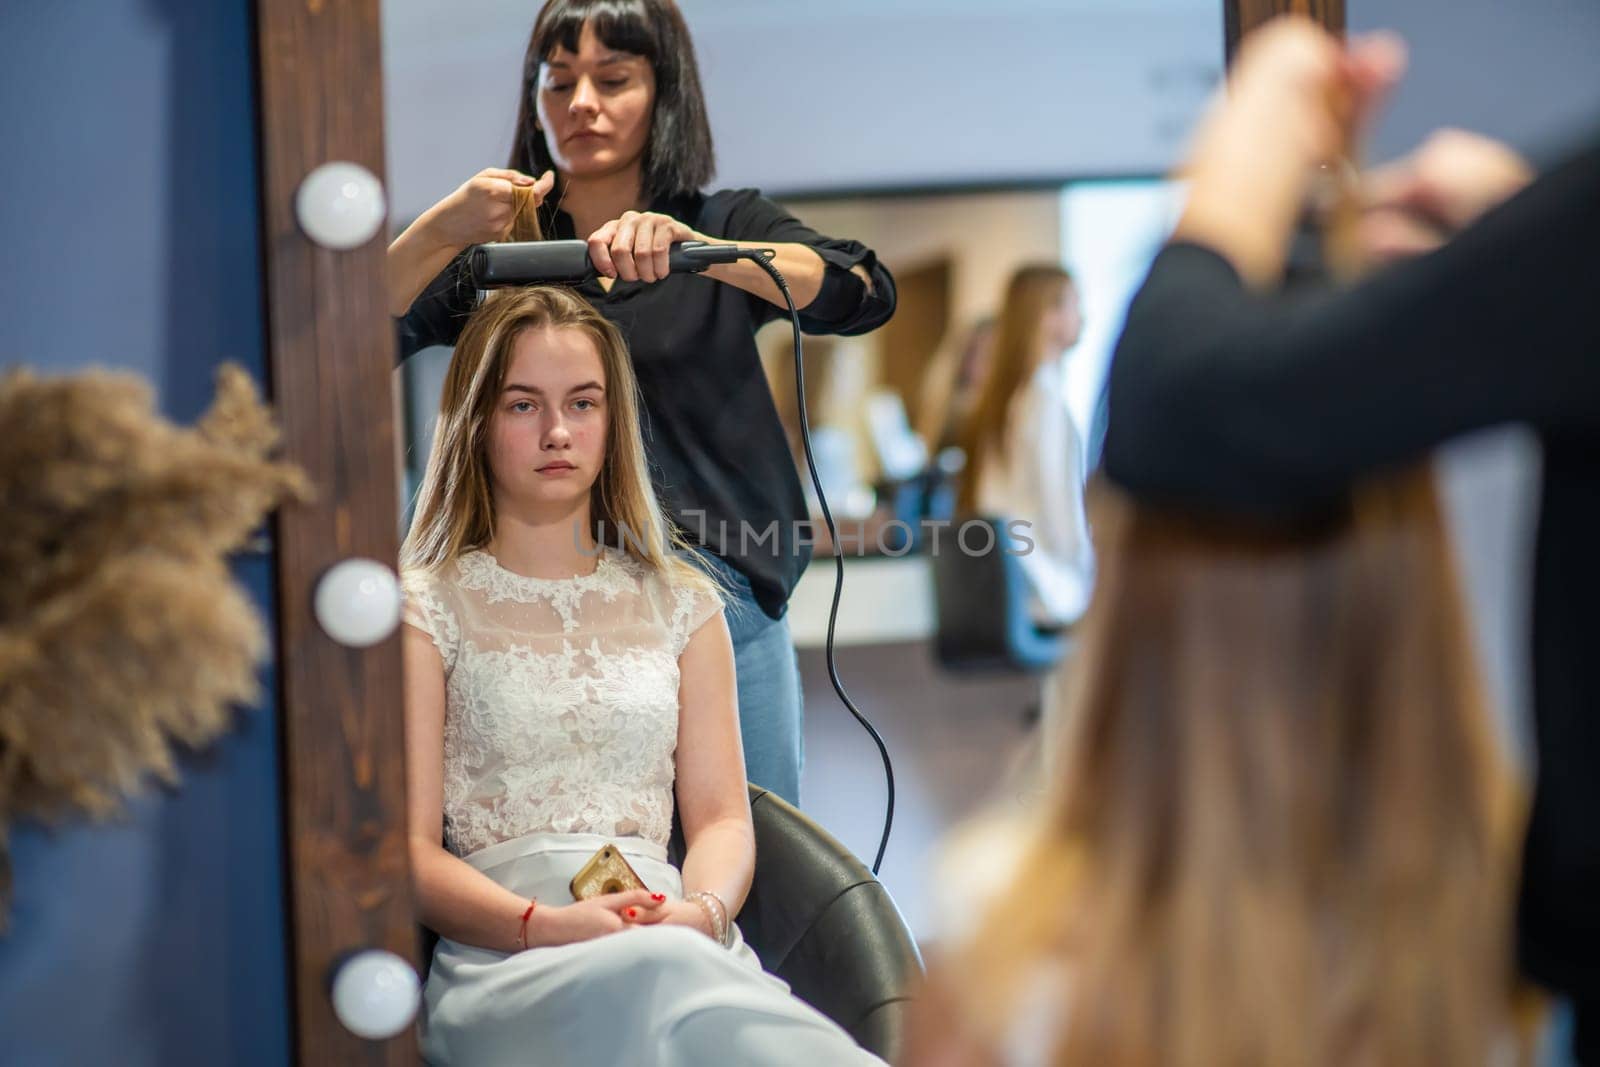 Girl hairdresser doing hairstyle in the form of spinning hair